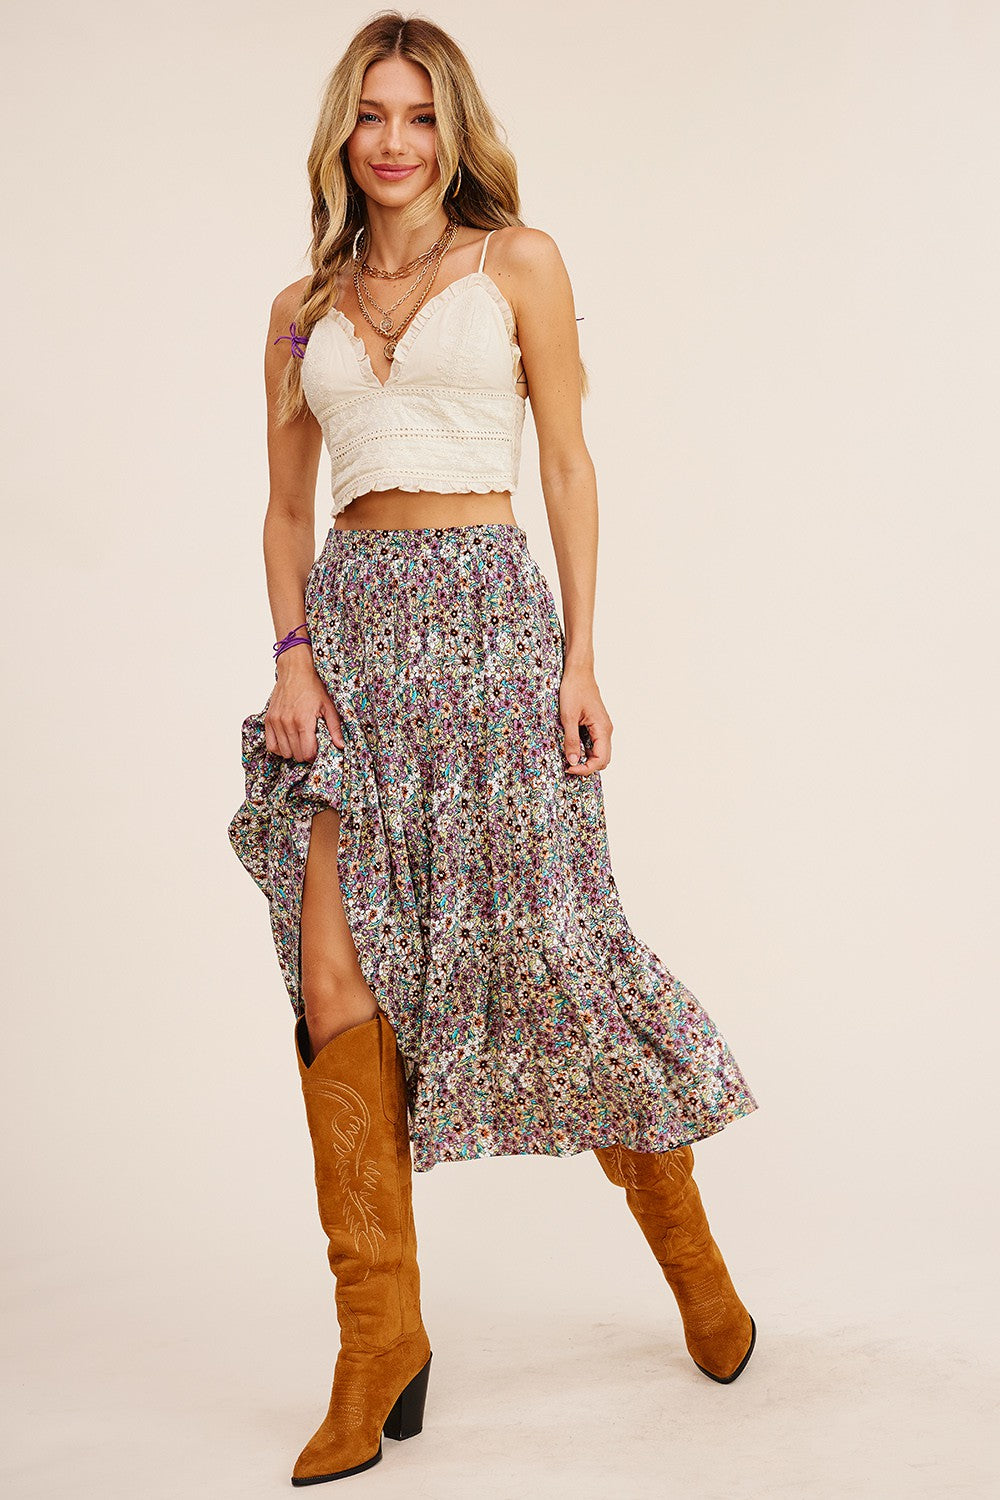 The Halle Floral Maxi Skirt